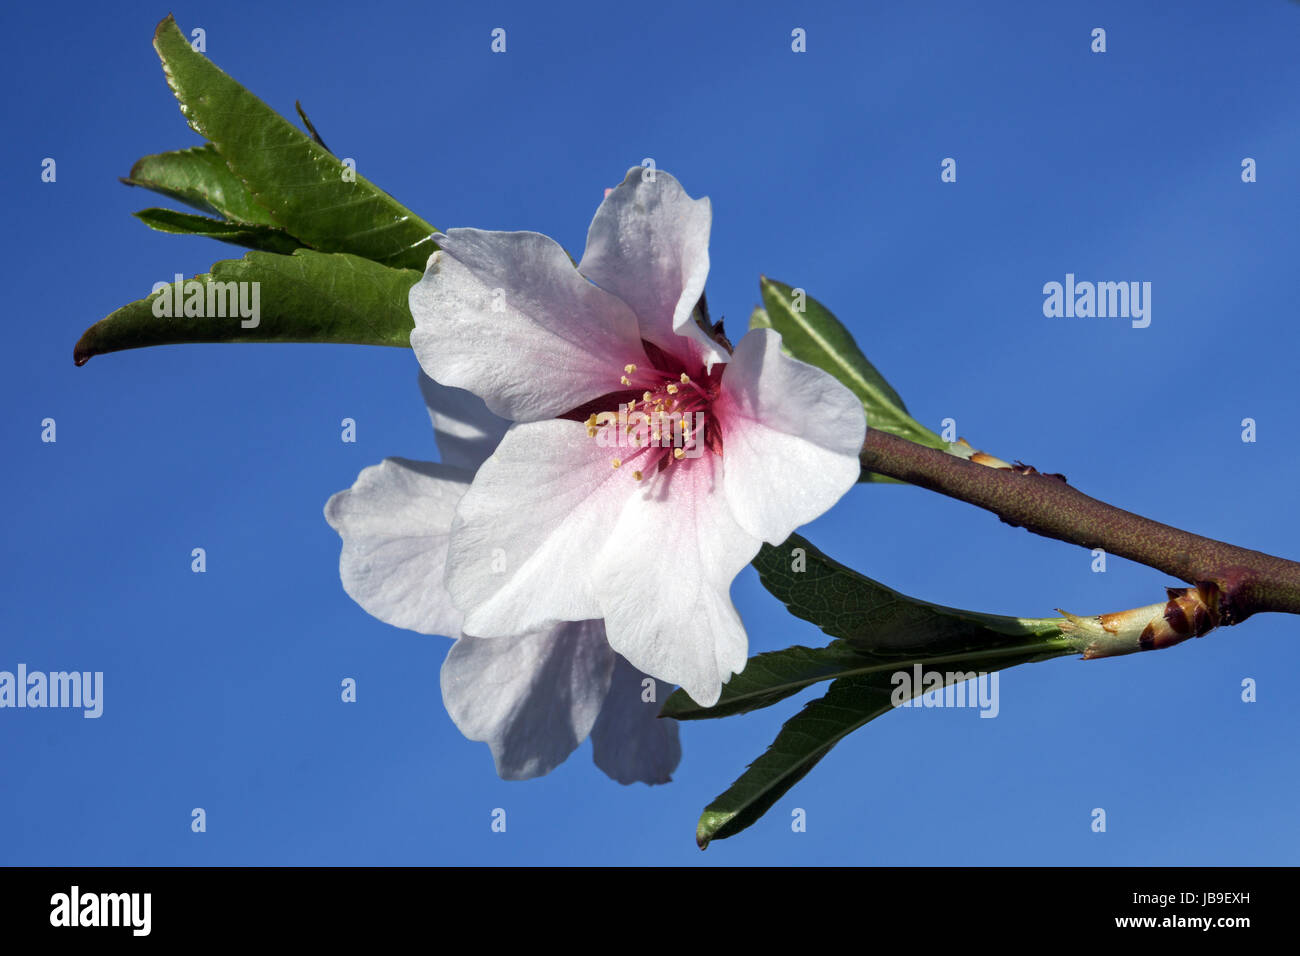 Almond blossoms (Prunus dulcis) on branch, blossoming almond tree, Baden-Württemberg, Germany Stock Photo